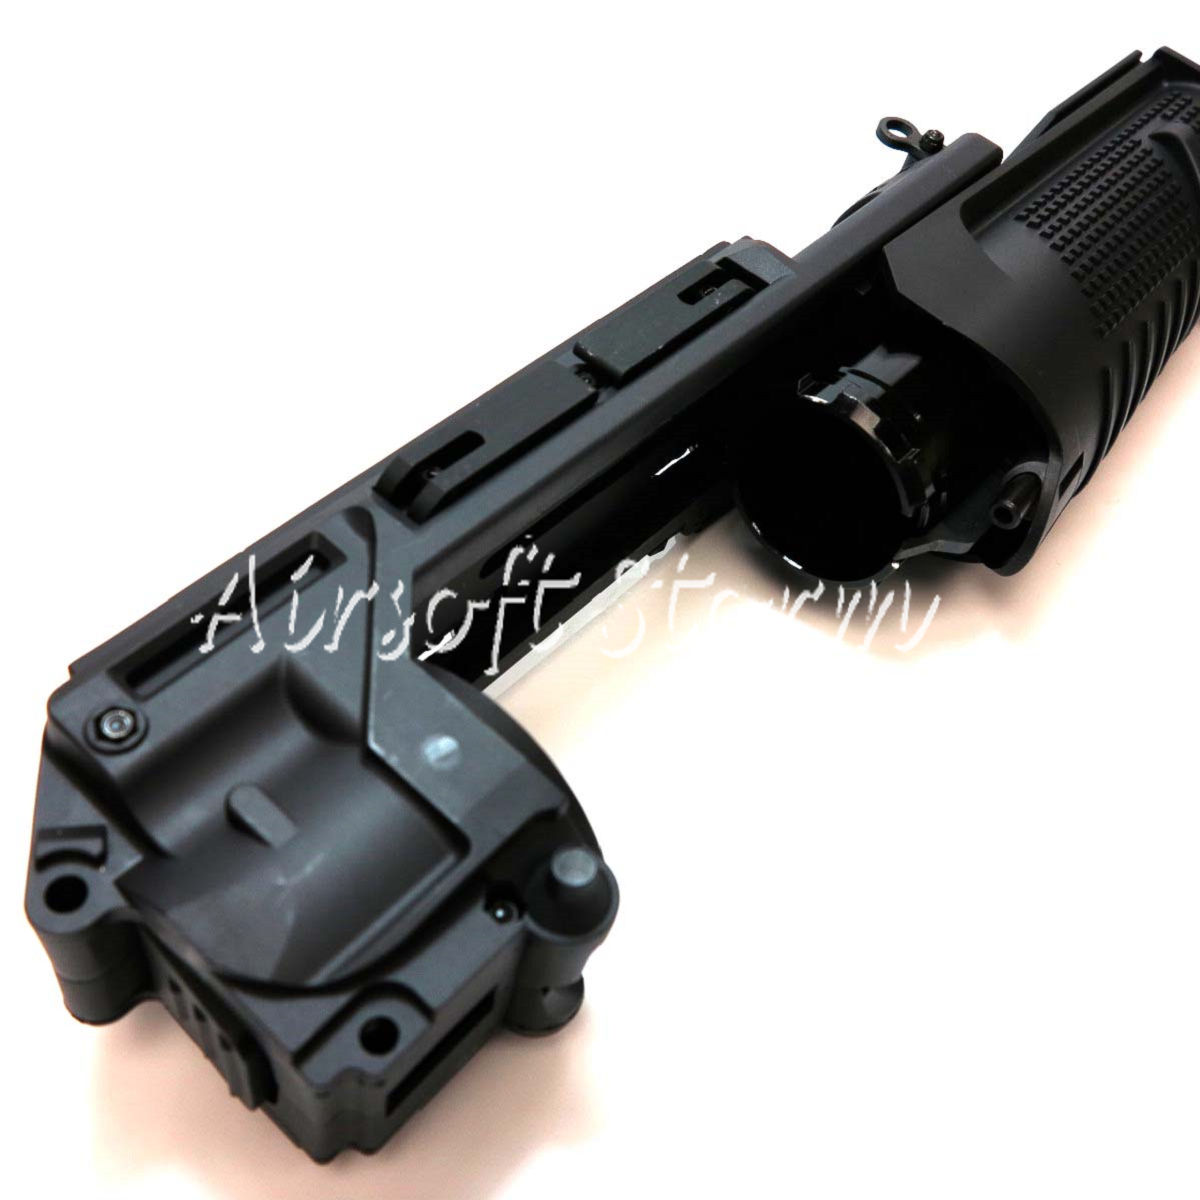 Shooting Gear EGLM 40mm SCAR Grenade Launcher Black - Click Image to Close